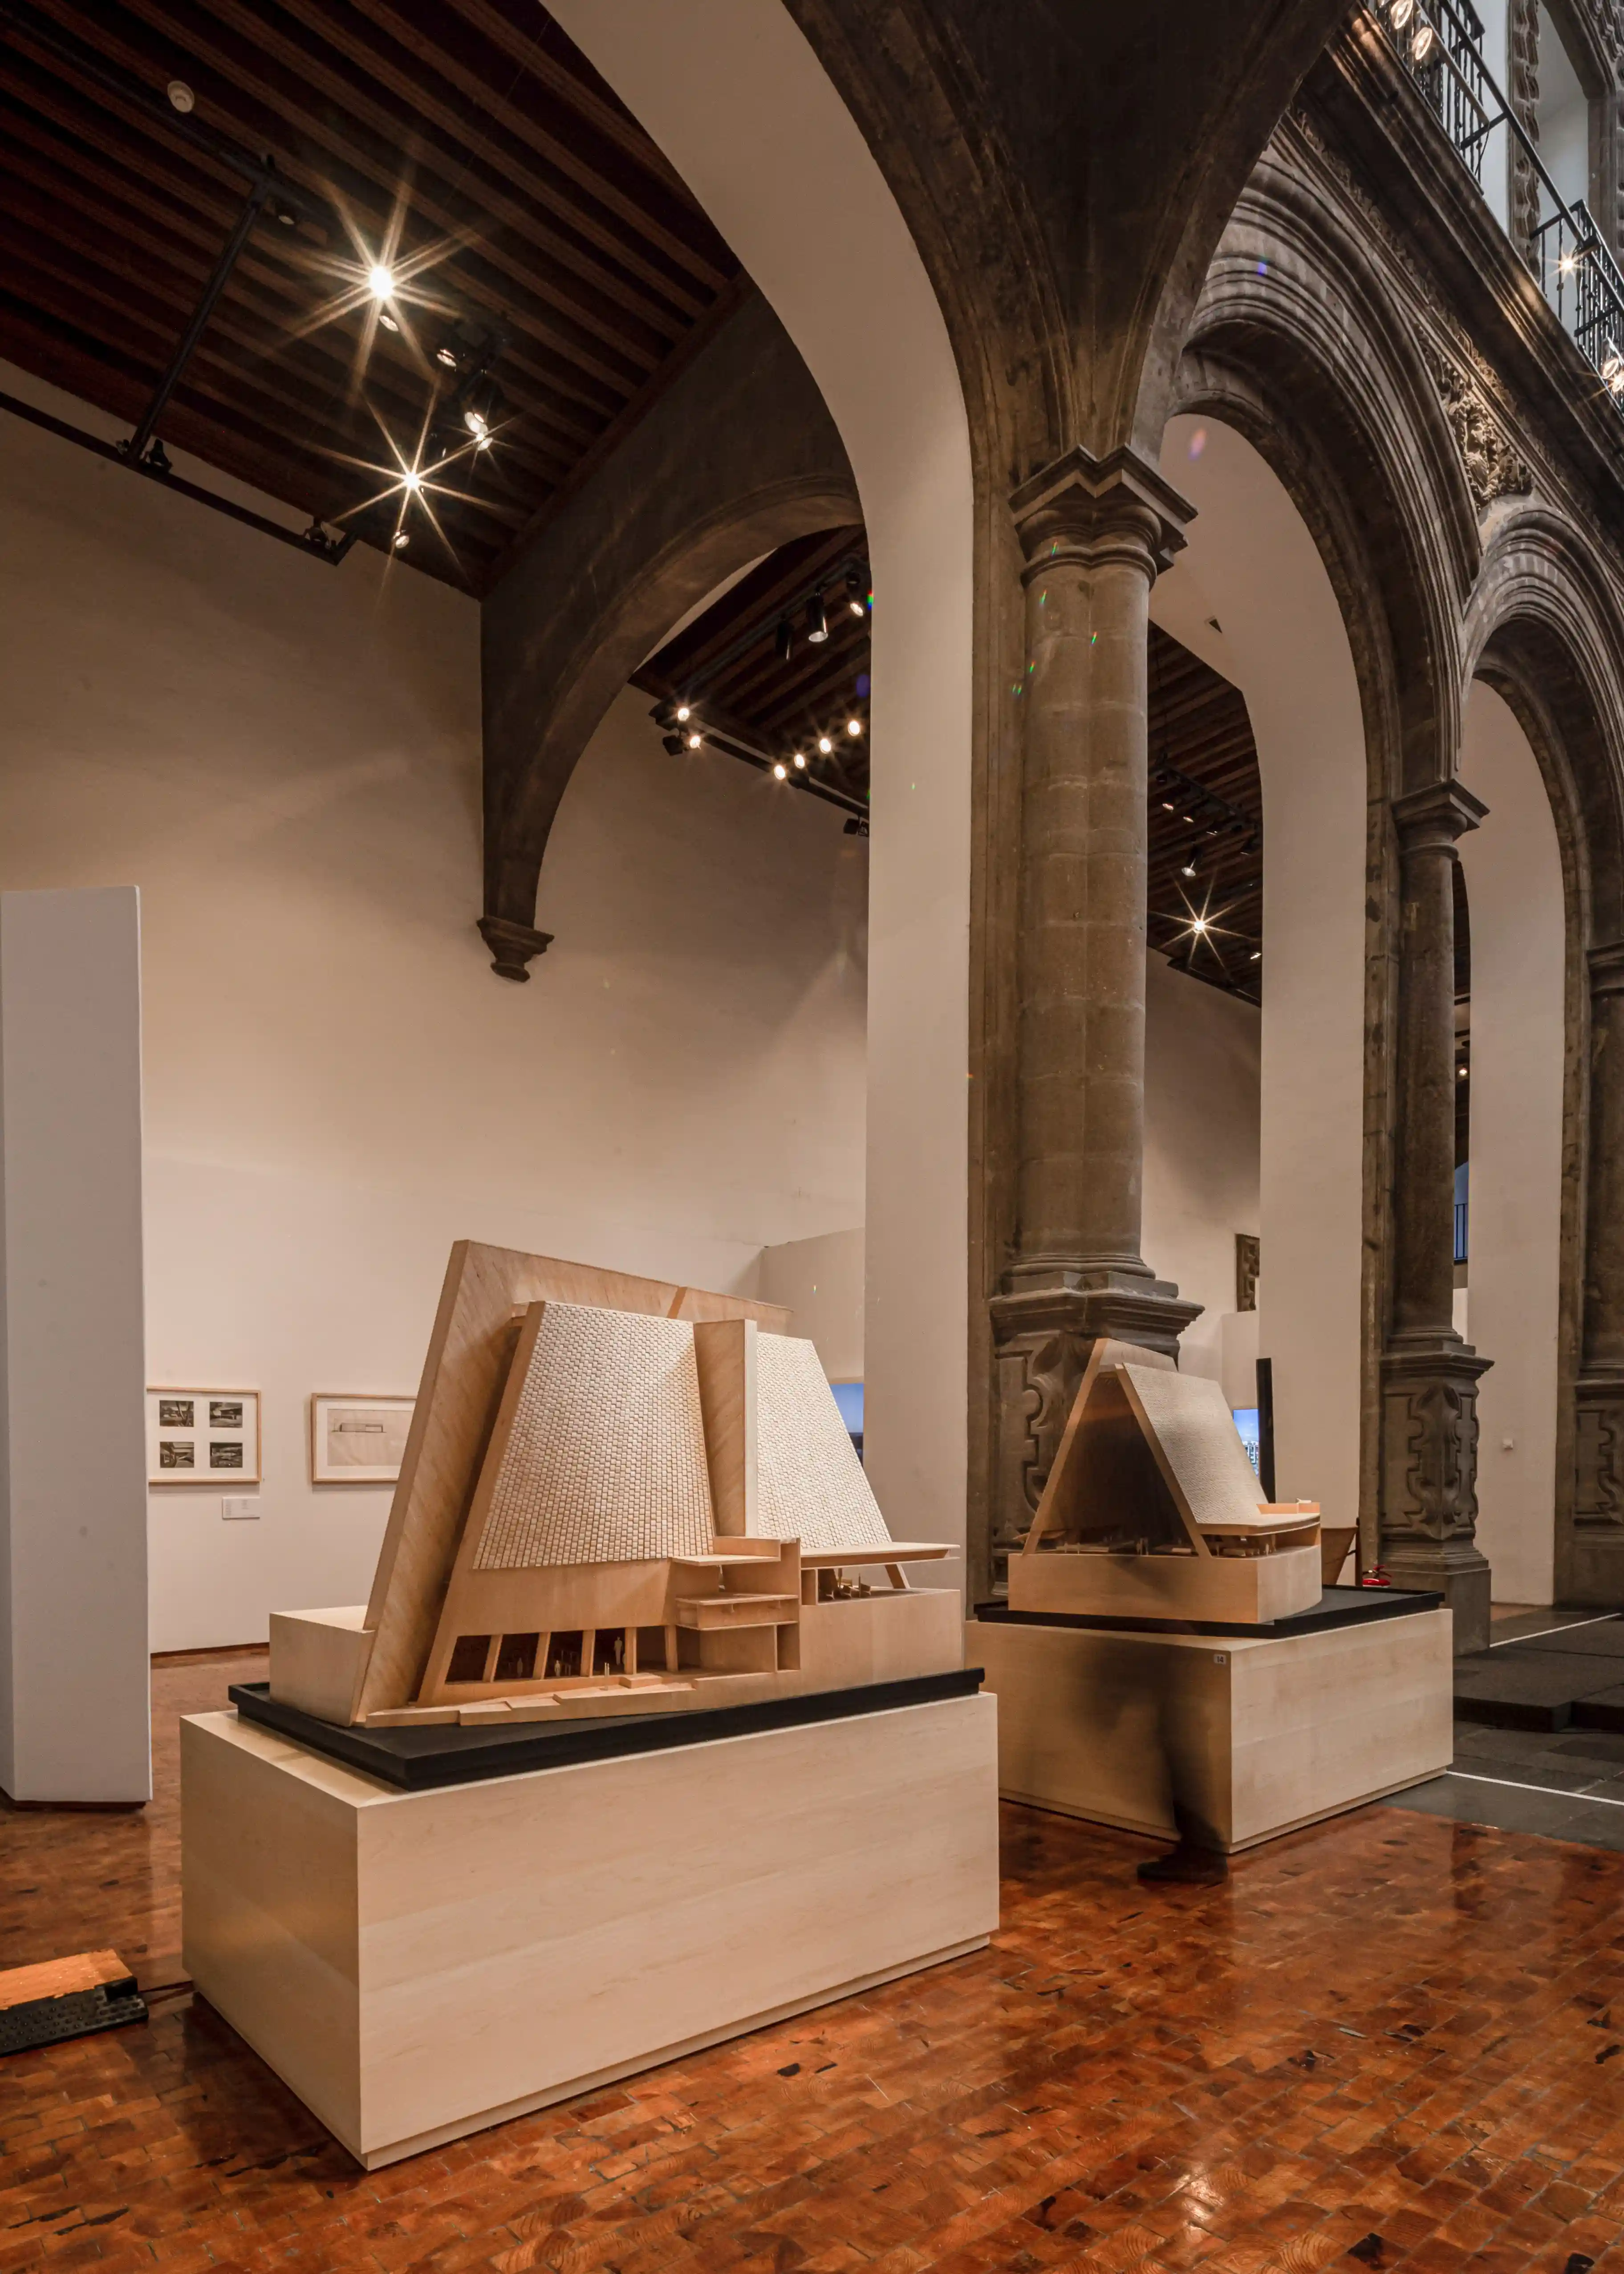 installation view of an architecture exhibition in a historic space.